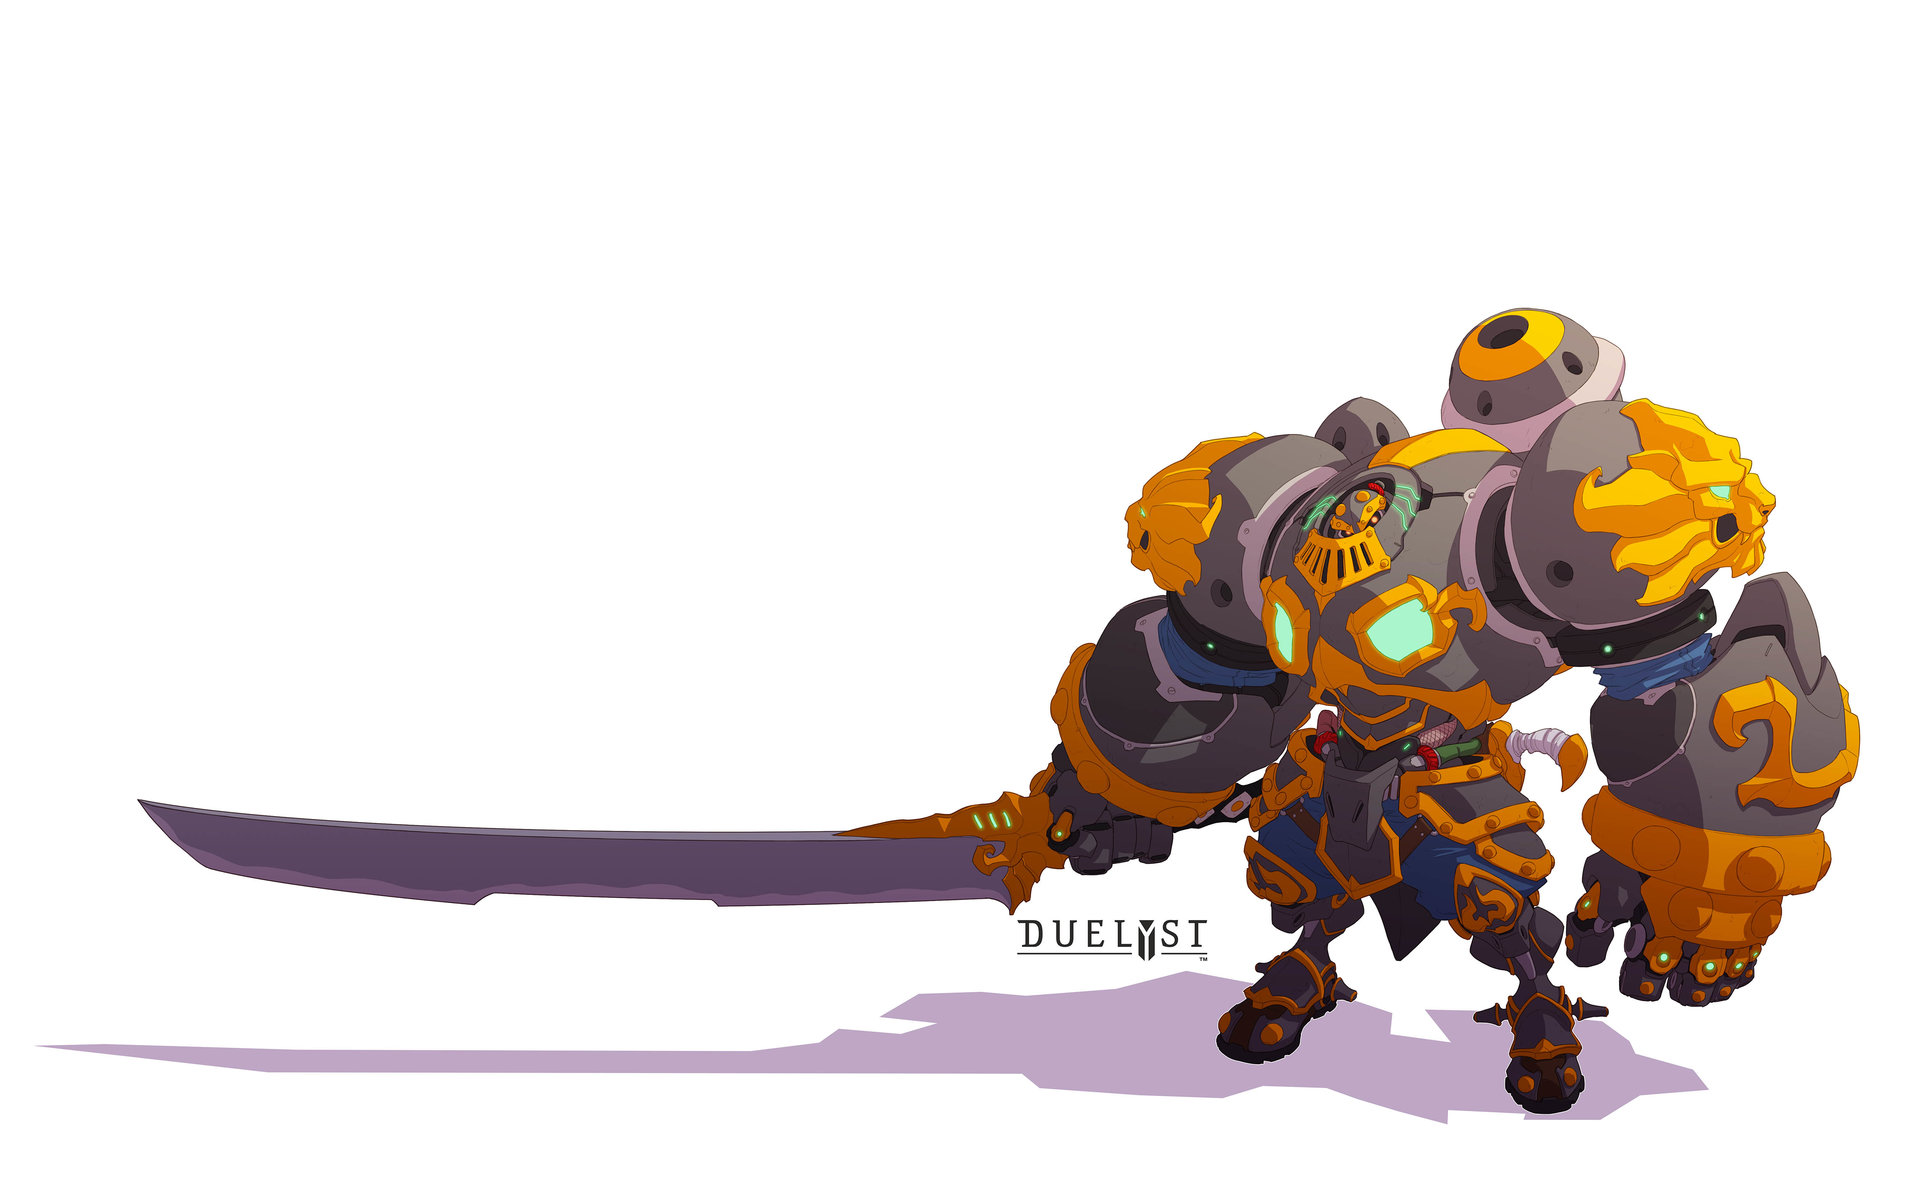 Duelyst Has Some Of The Best Character Art You’ll See